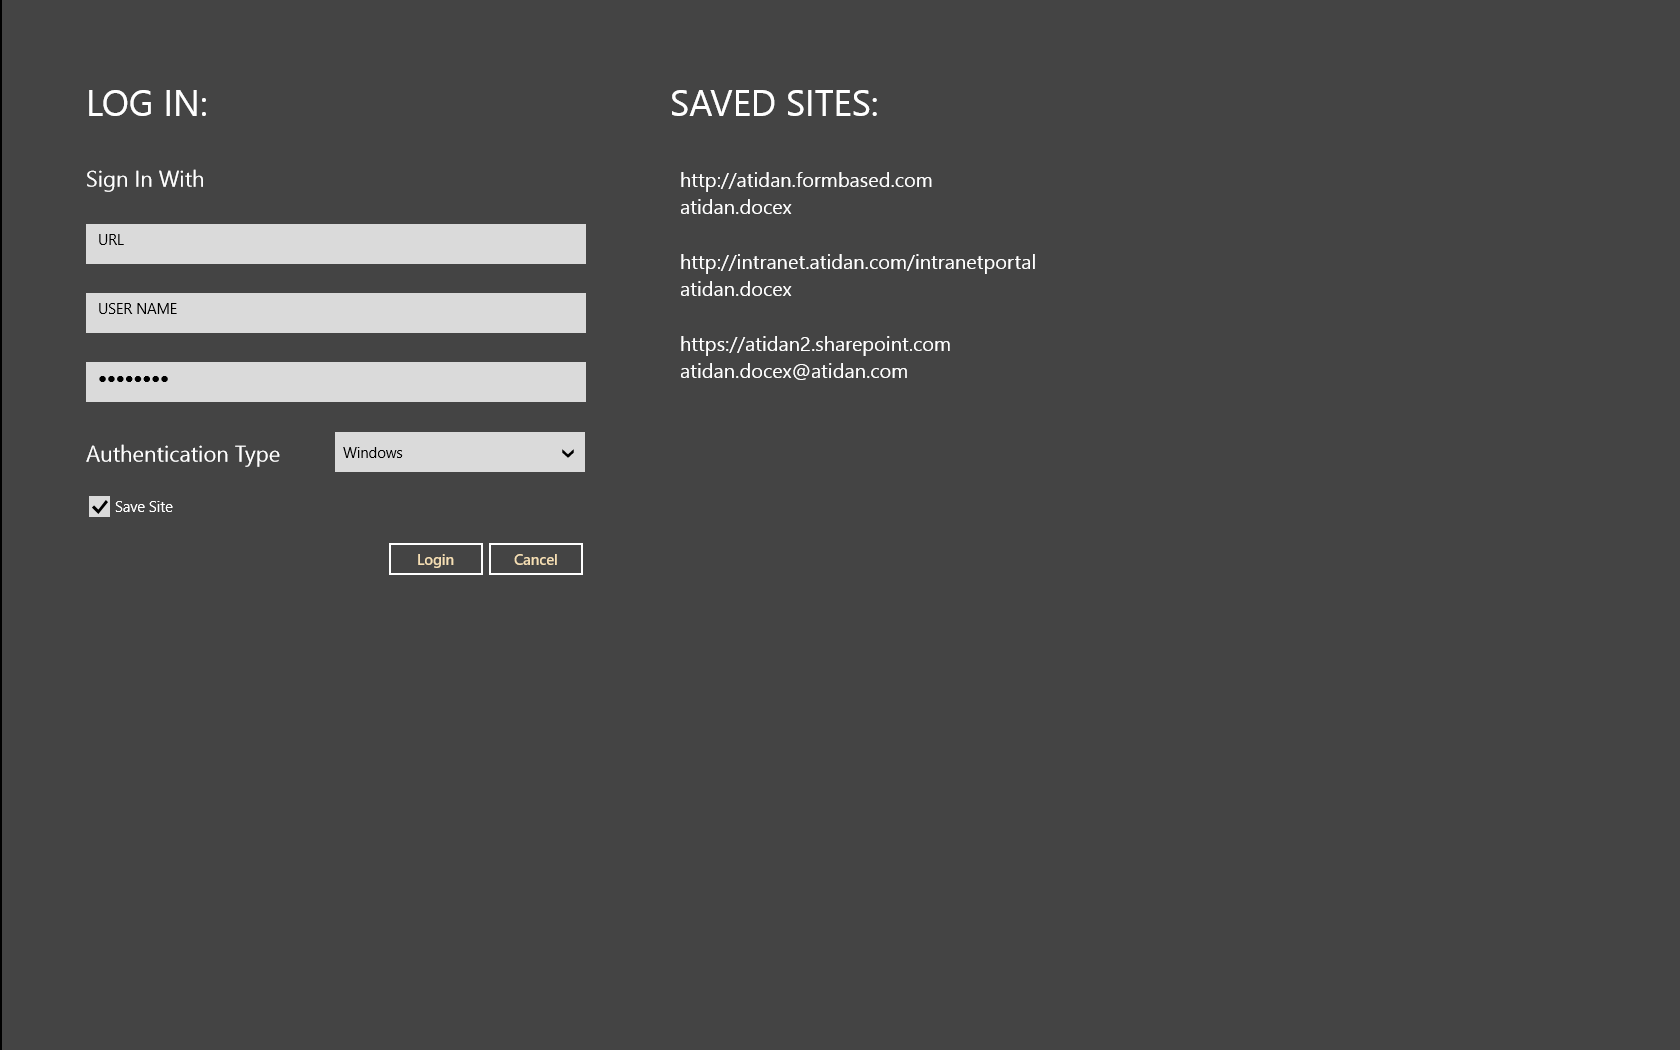 Starting screen with Login and Saved Site